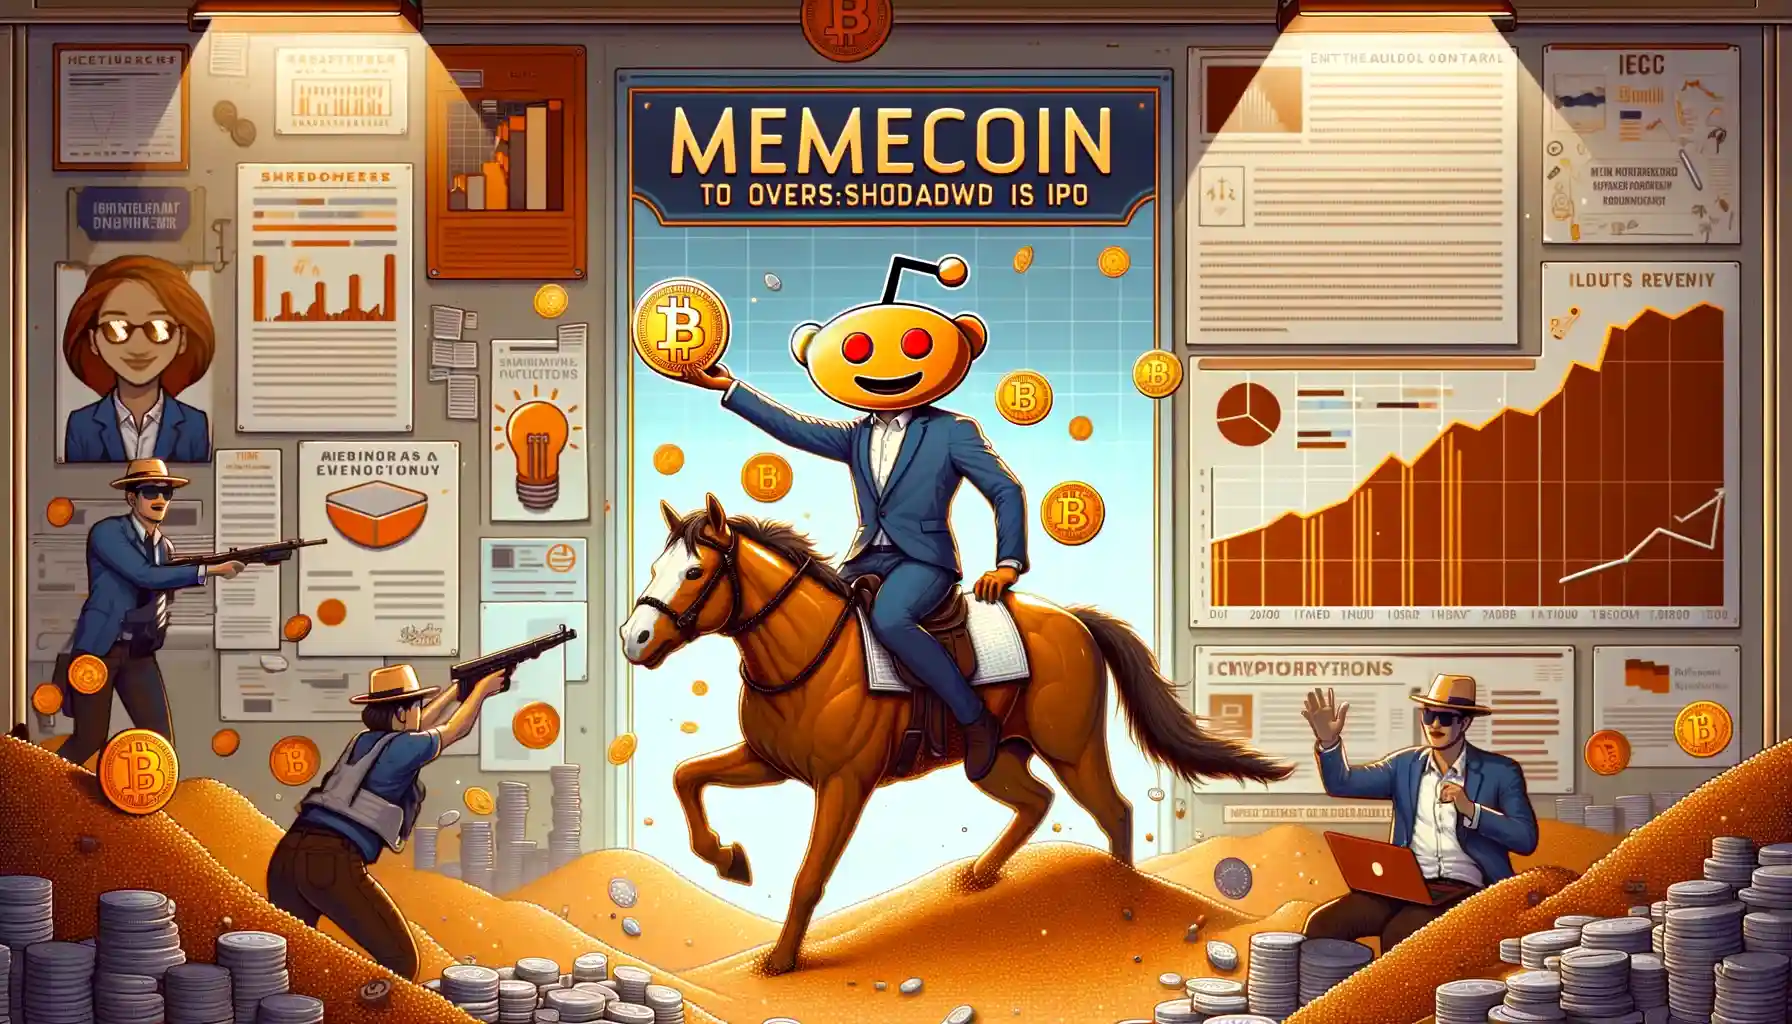 Can Reddit’s memecoin flip its IPO? This Dogecoin millionaire says yes!